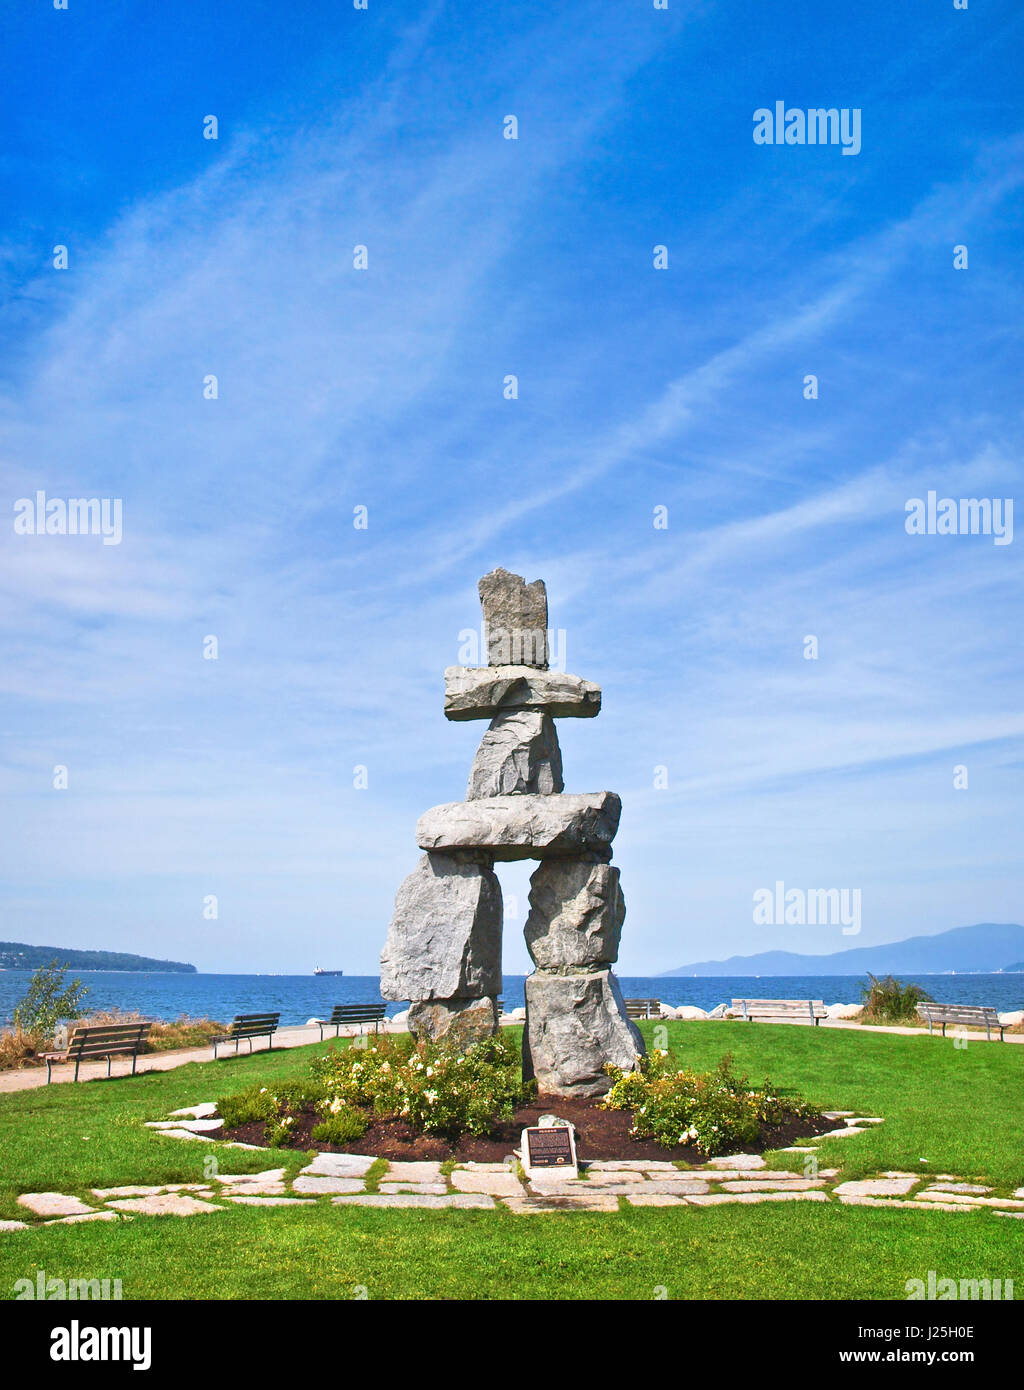 Inukshuk, symbol of the 2010 winter olympic games, with blue sky at English Bay in Vancouver, British Columbia, Canada Stock Photo